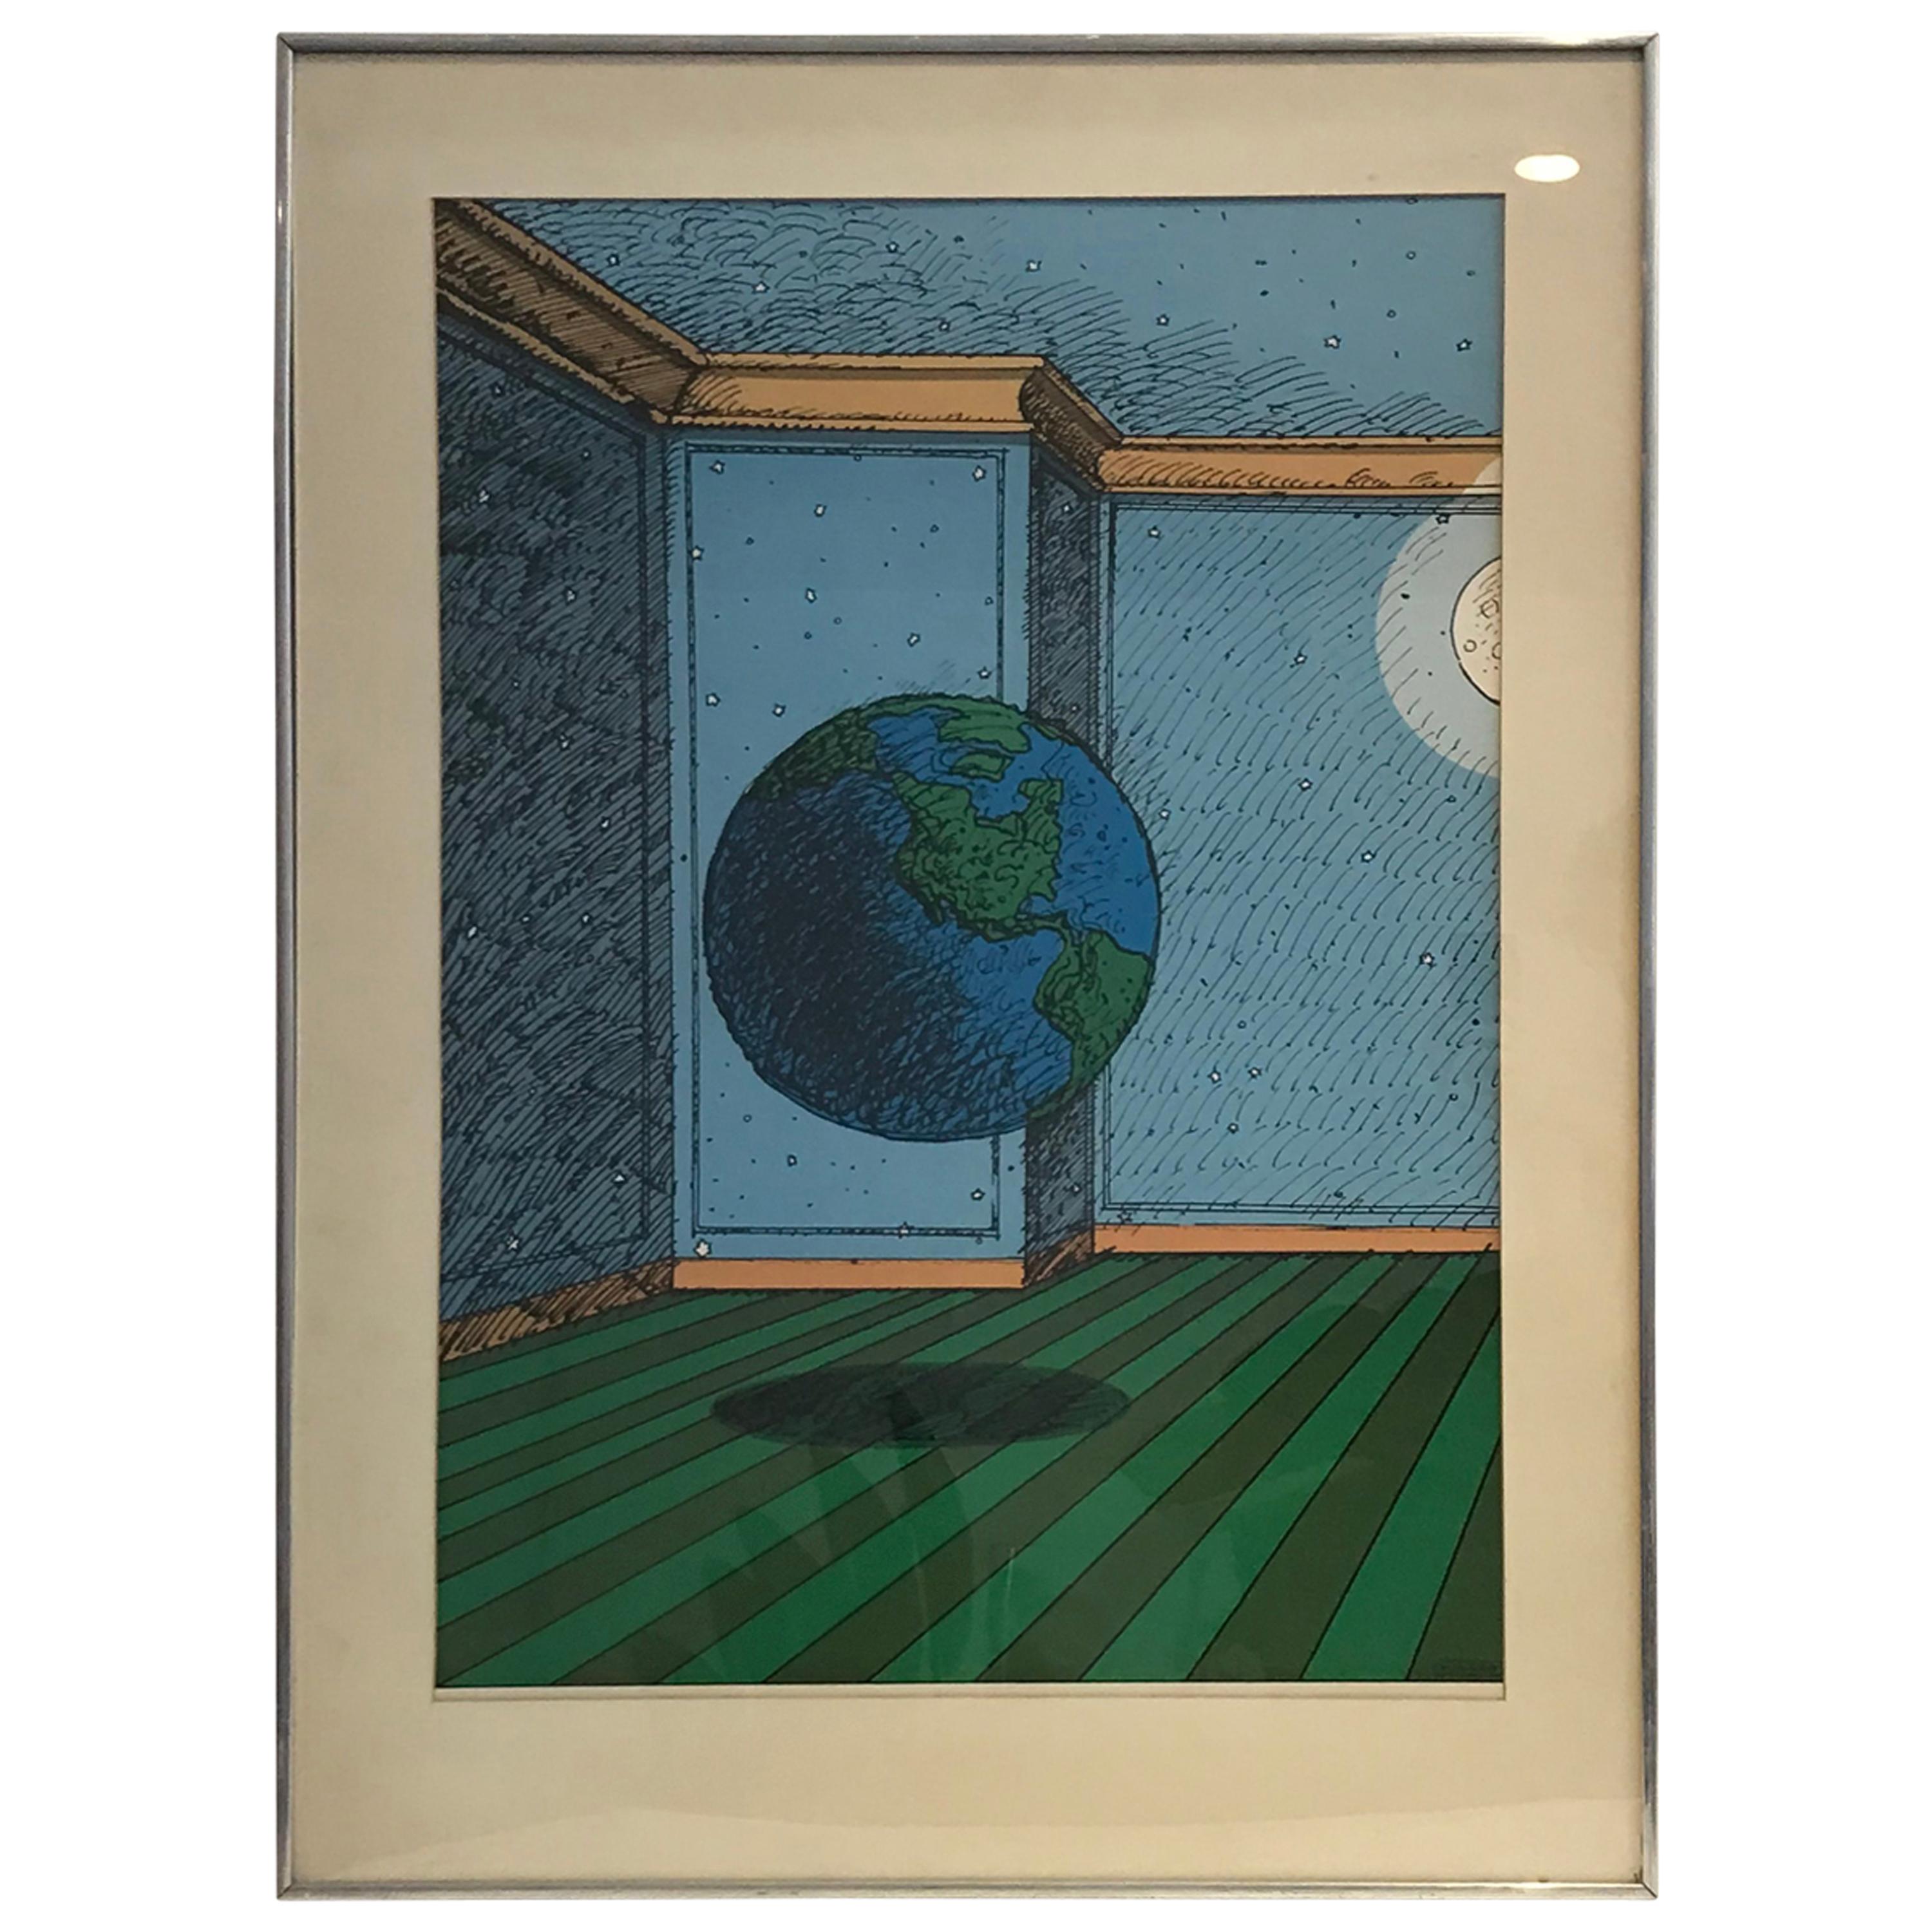 Milton Glaser "Give Earth A Chance" Earth Day Lithography